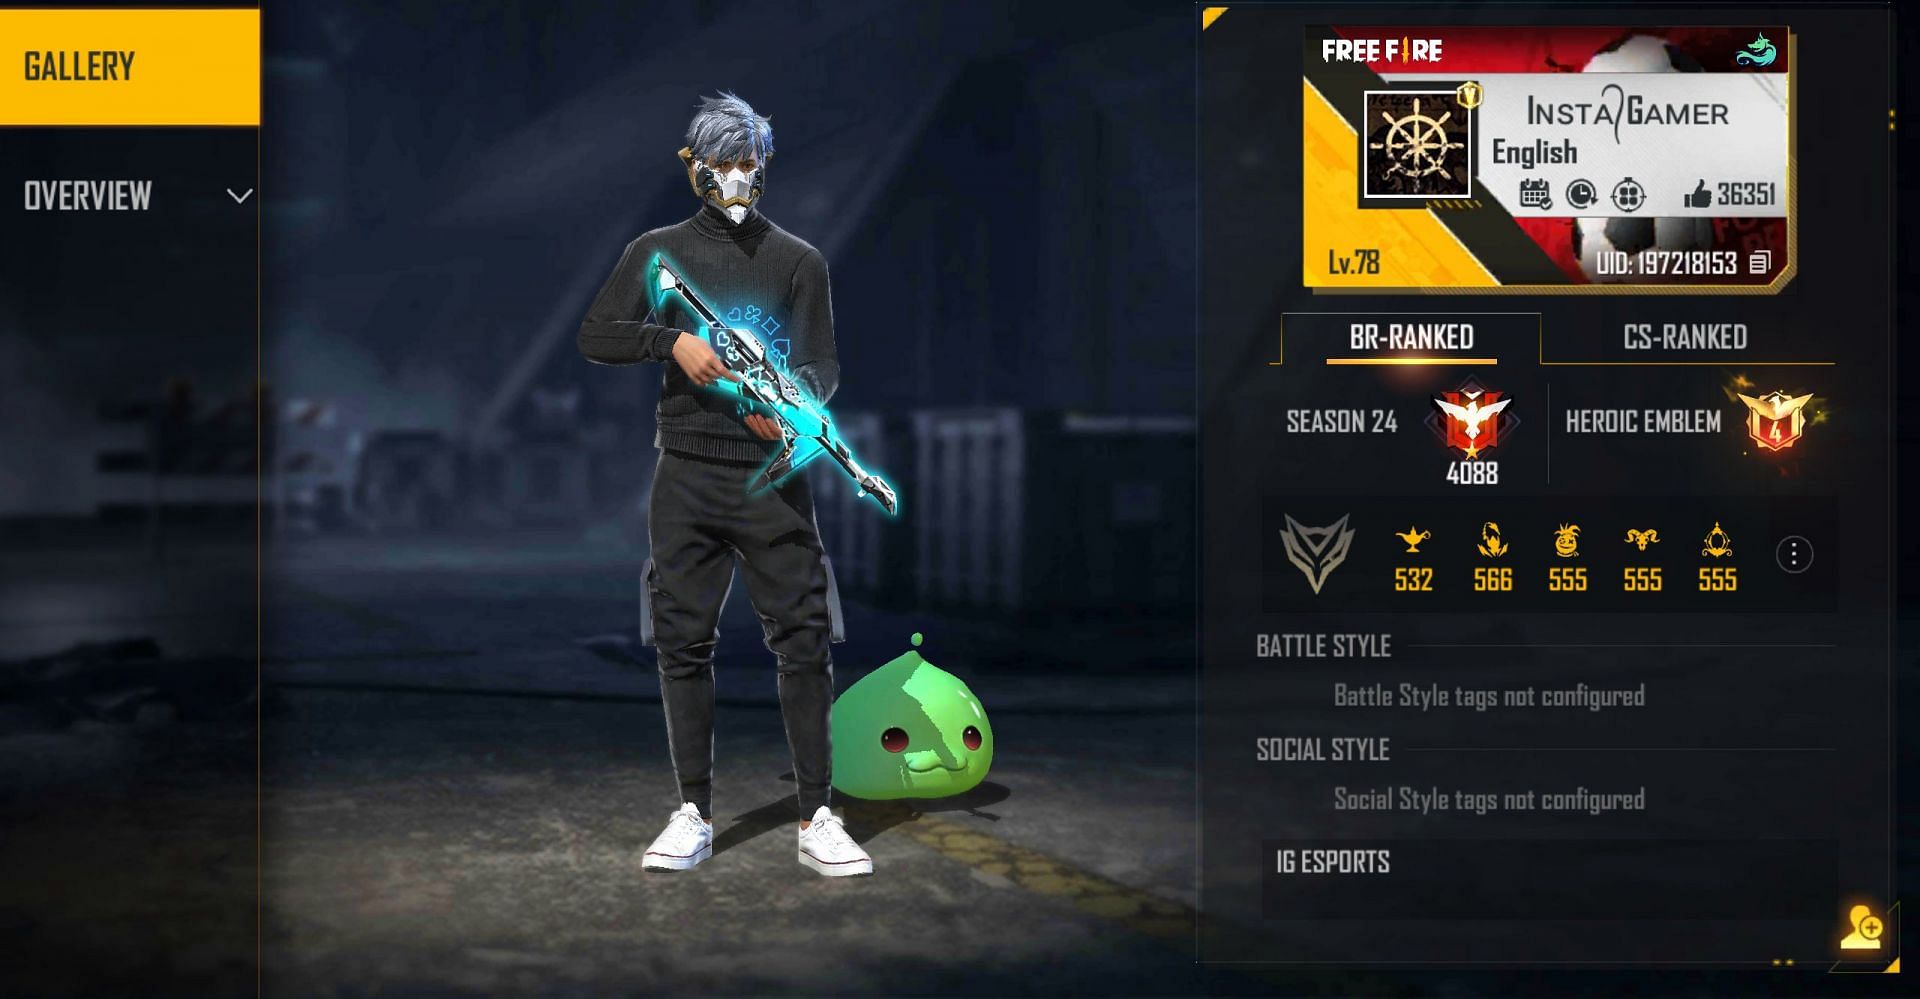 Insta Gamer is in Heroic in the battle royale (Image via Free Fire)